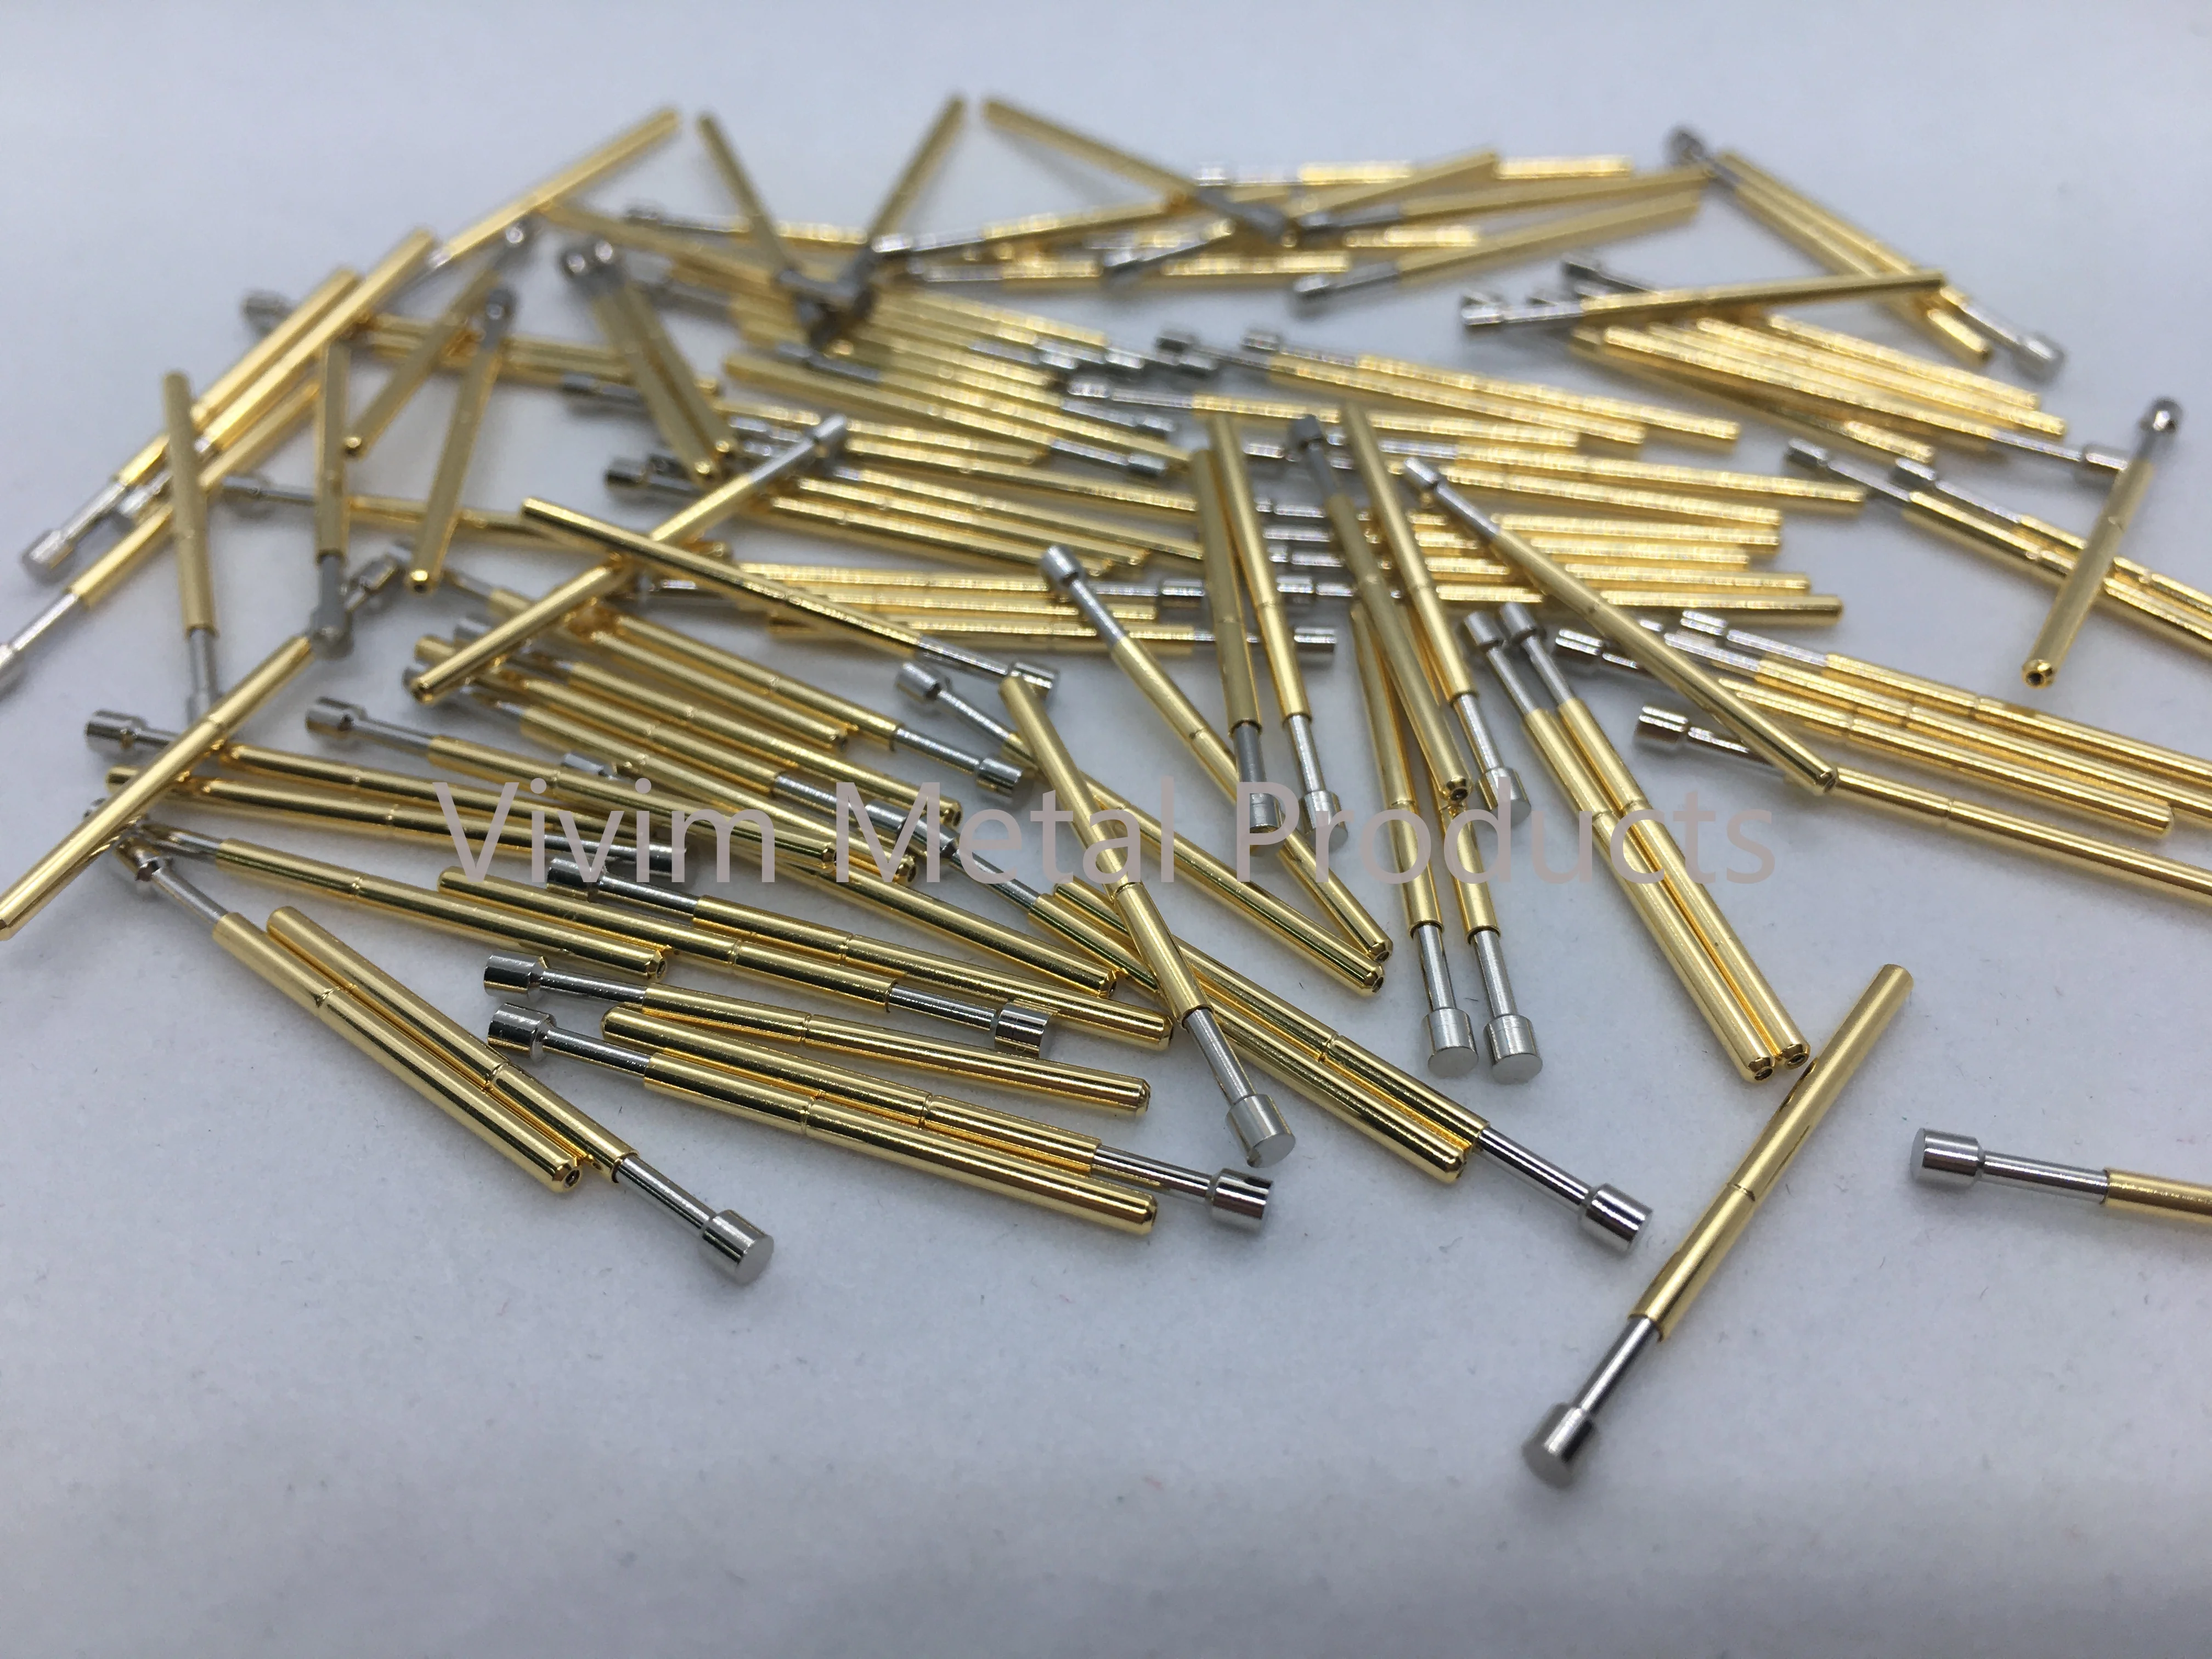 100 Pcs Crown Needle Test Probe P160-G3 Nickel-plated Test Pin Spring Thimble Length 24.5mm G Electronic Tool Metal Probe